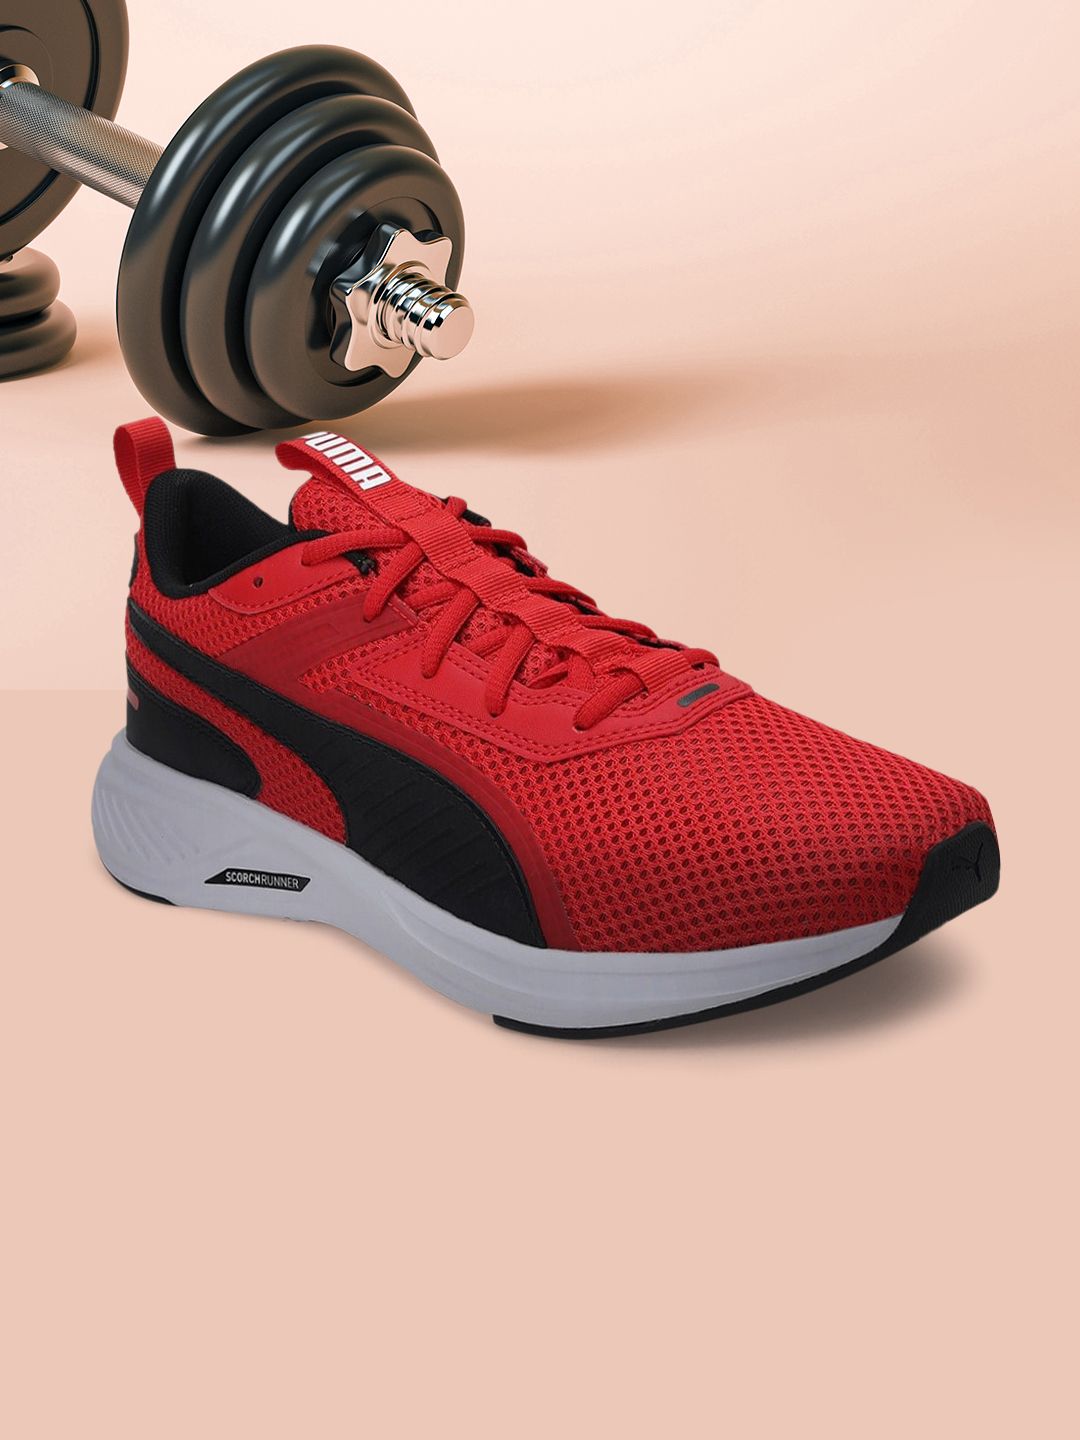 Puma Unisex Red Textile Scorch Running Shoes Price in India